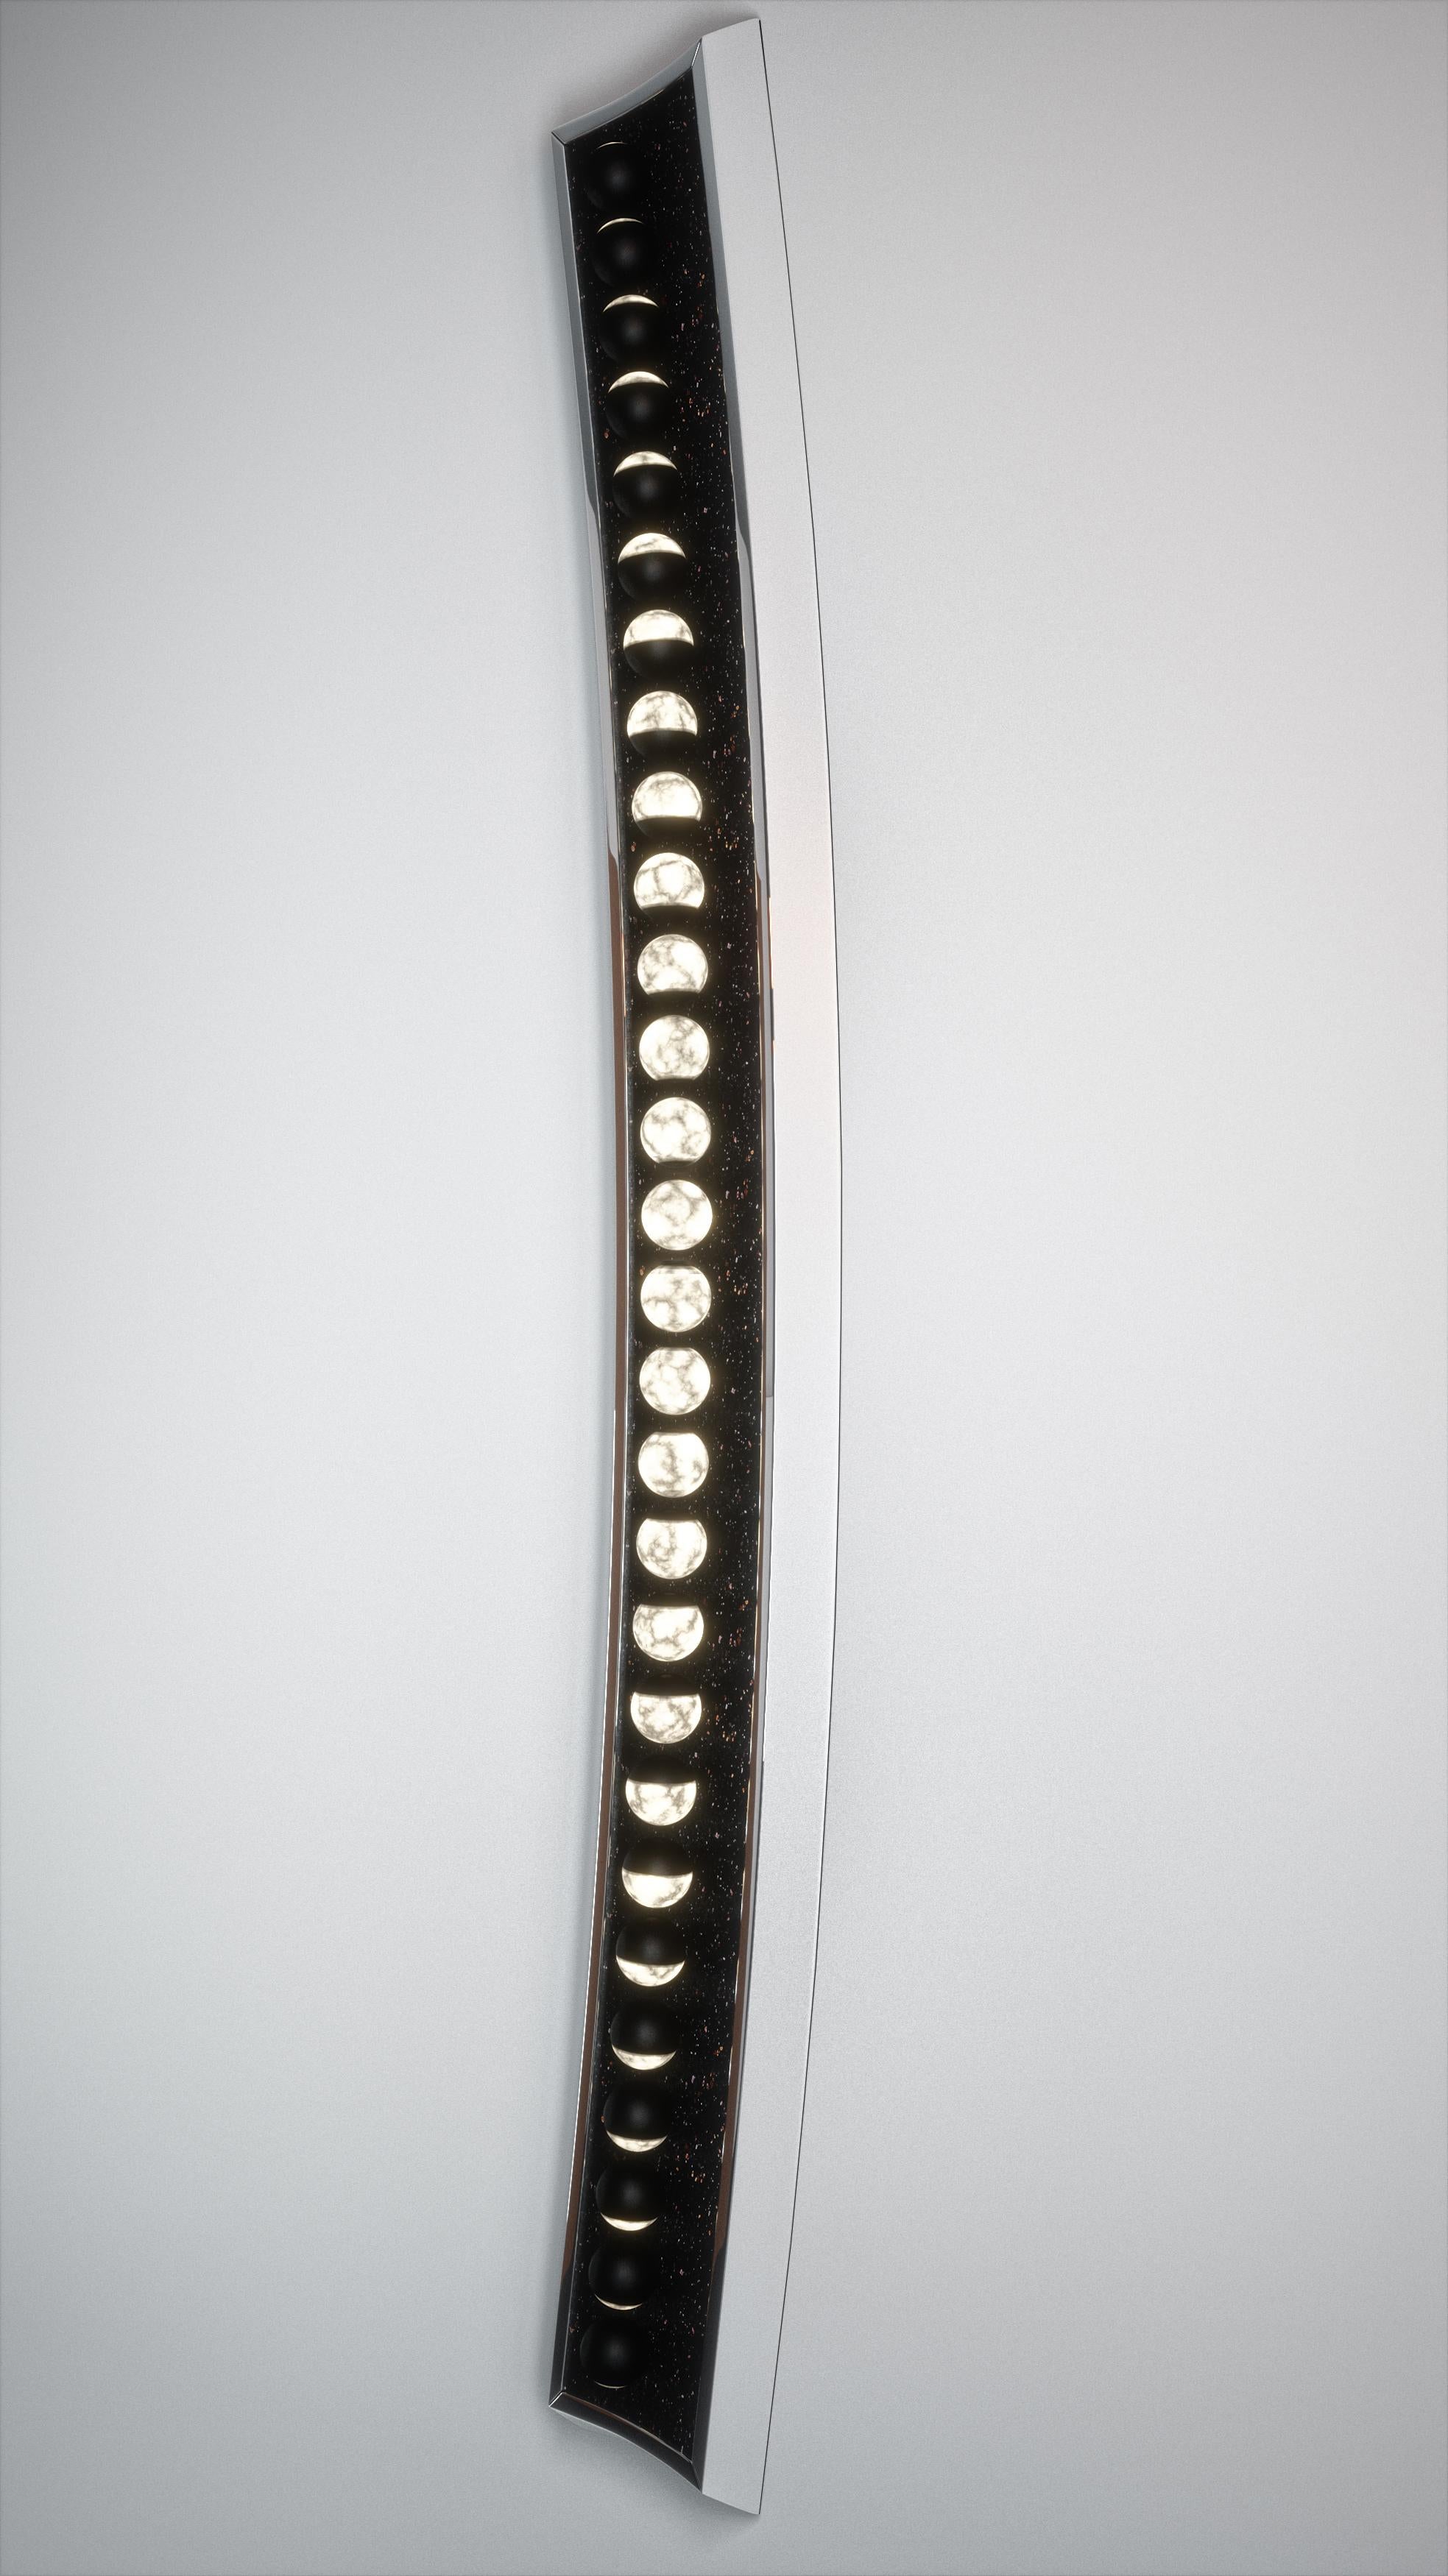 Synodic sconce:
Nightlight brings mankind in touch with the mysteries of space and the farther reaches of the universe. The moon, traditionally our principal source of nightlight, can evoke strong emotions- from fear and terror to peace and